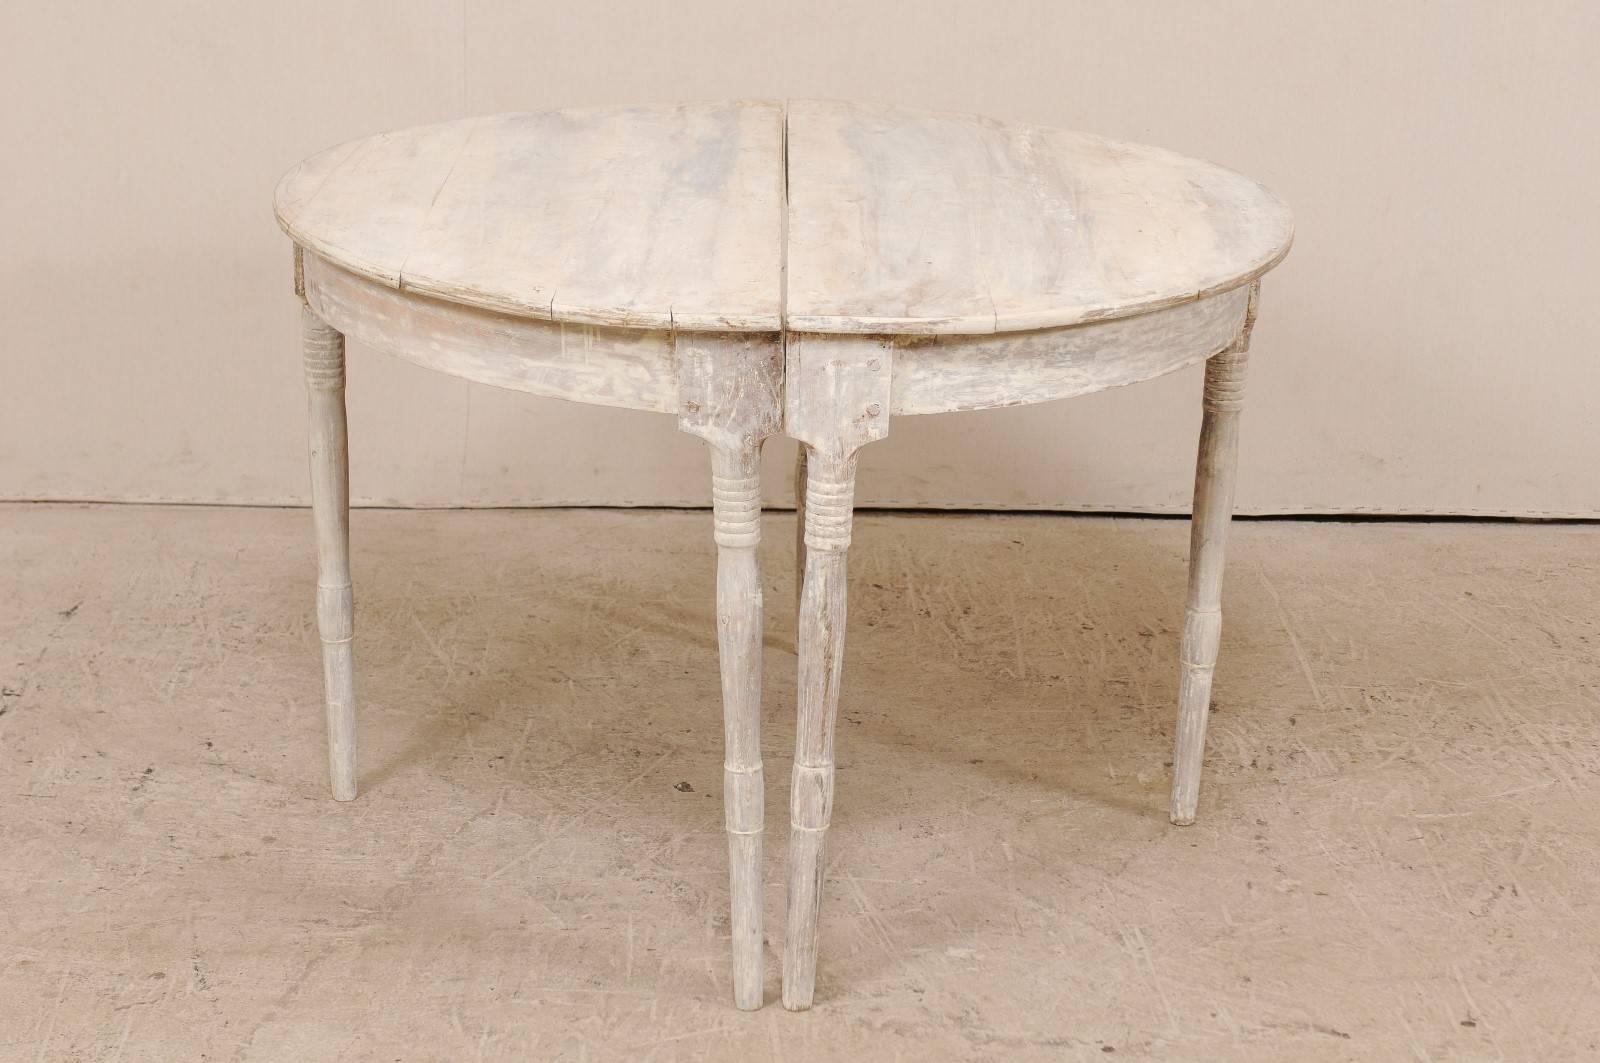 Pair of 19th Century Swedish Demilune Tables in Pale Grey and White Hues 3